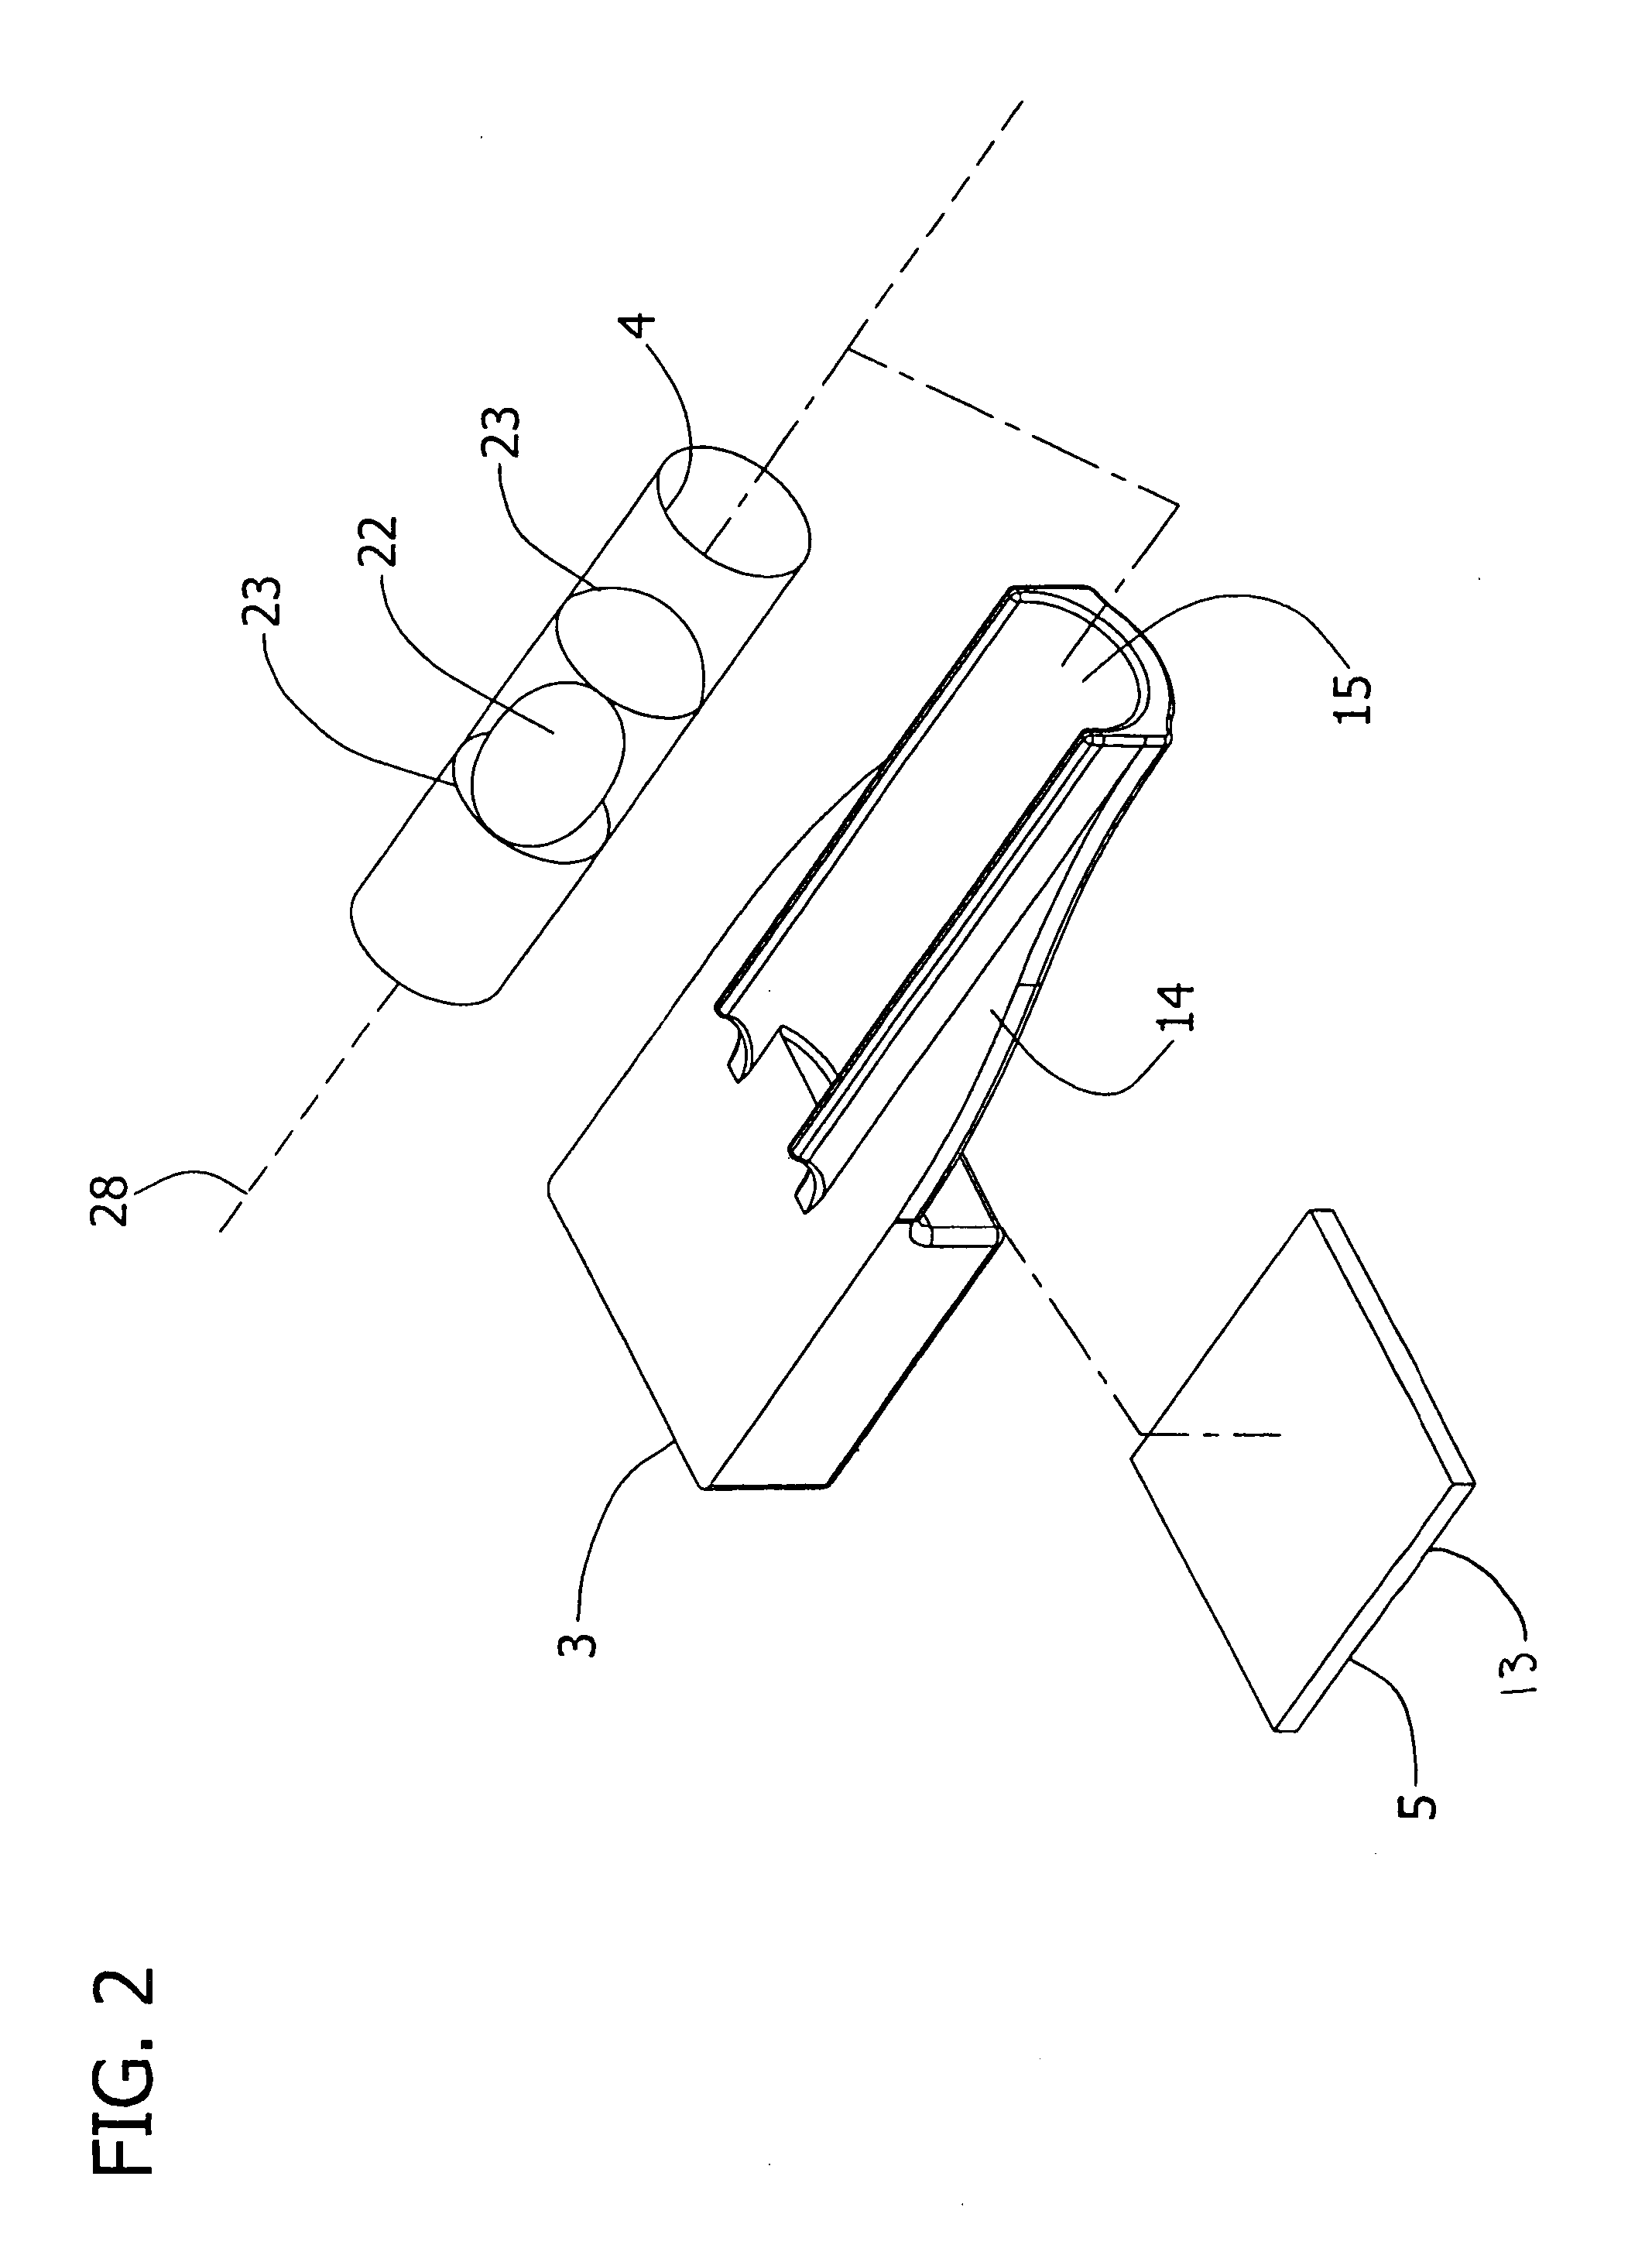 Method and apparatus for alignment of firearm sights